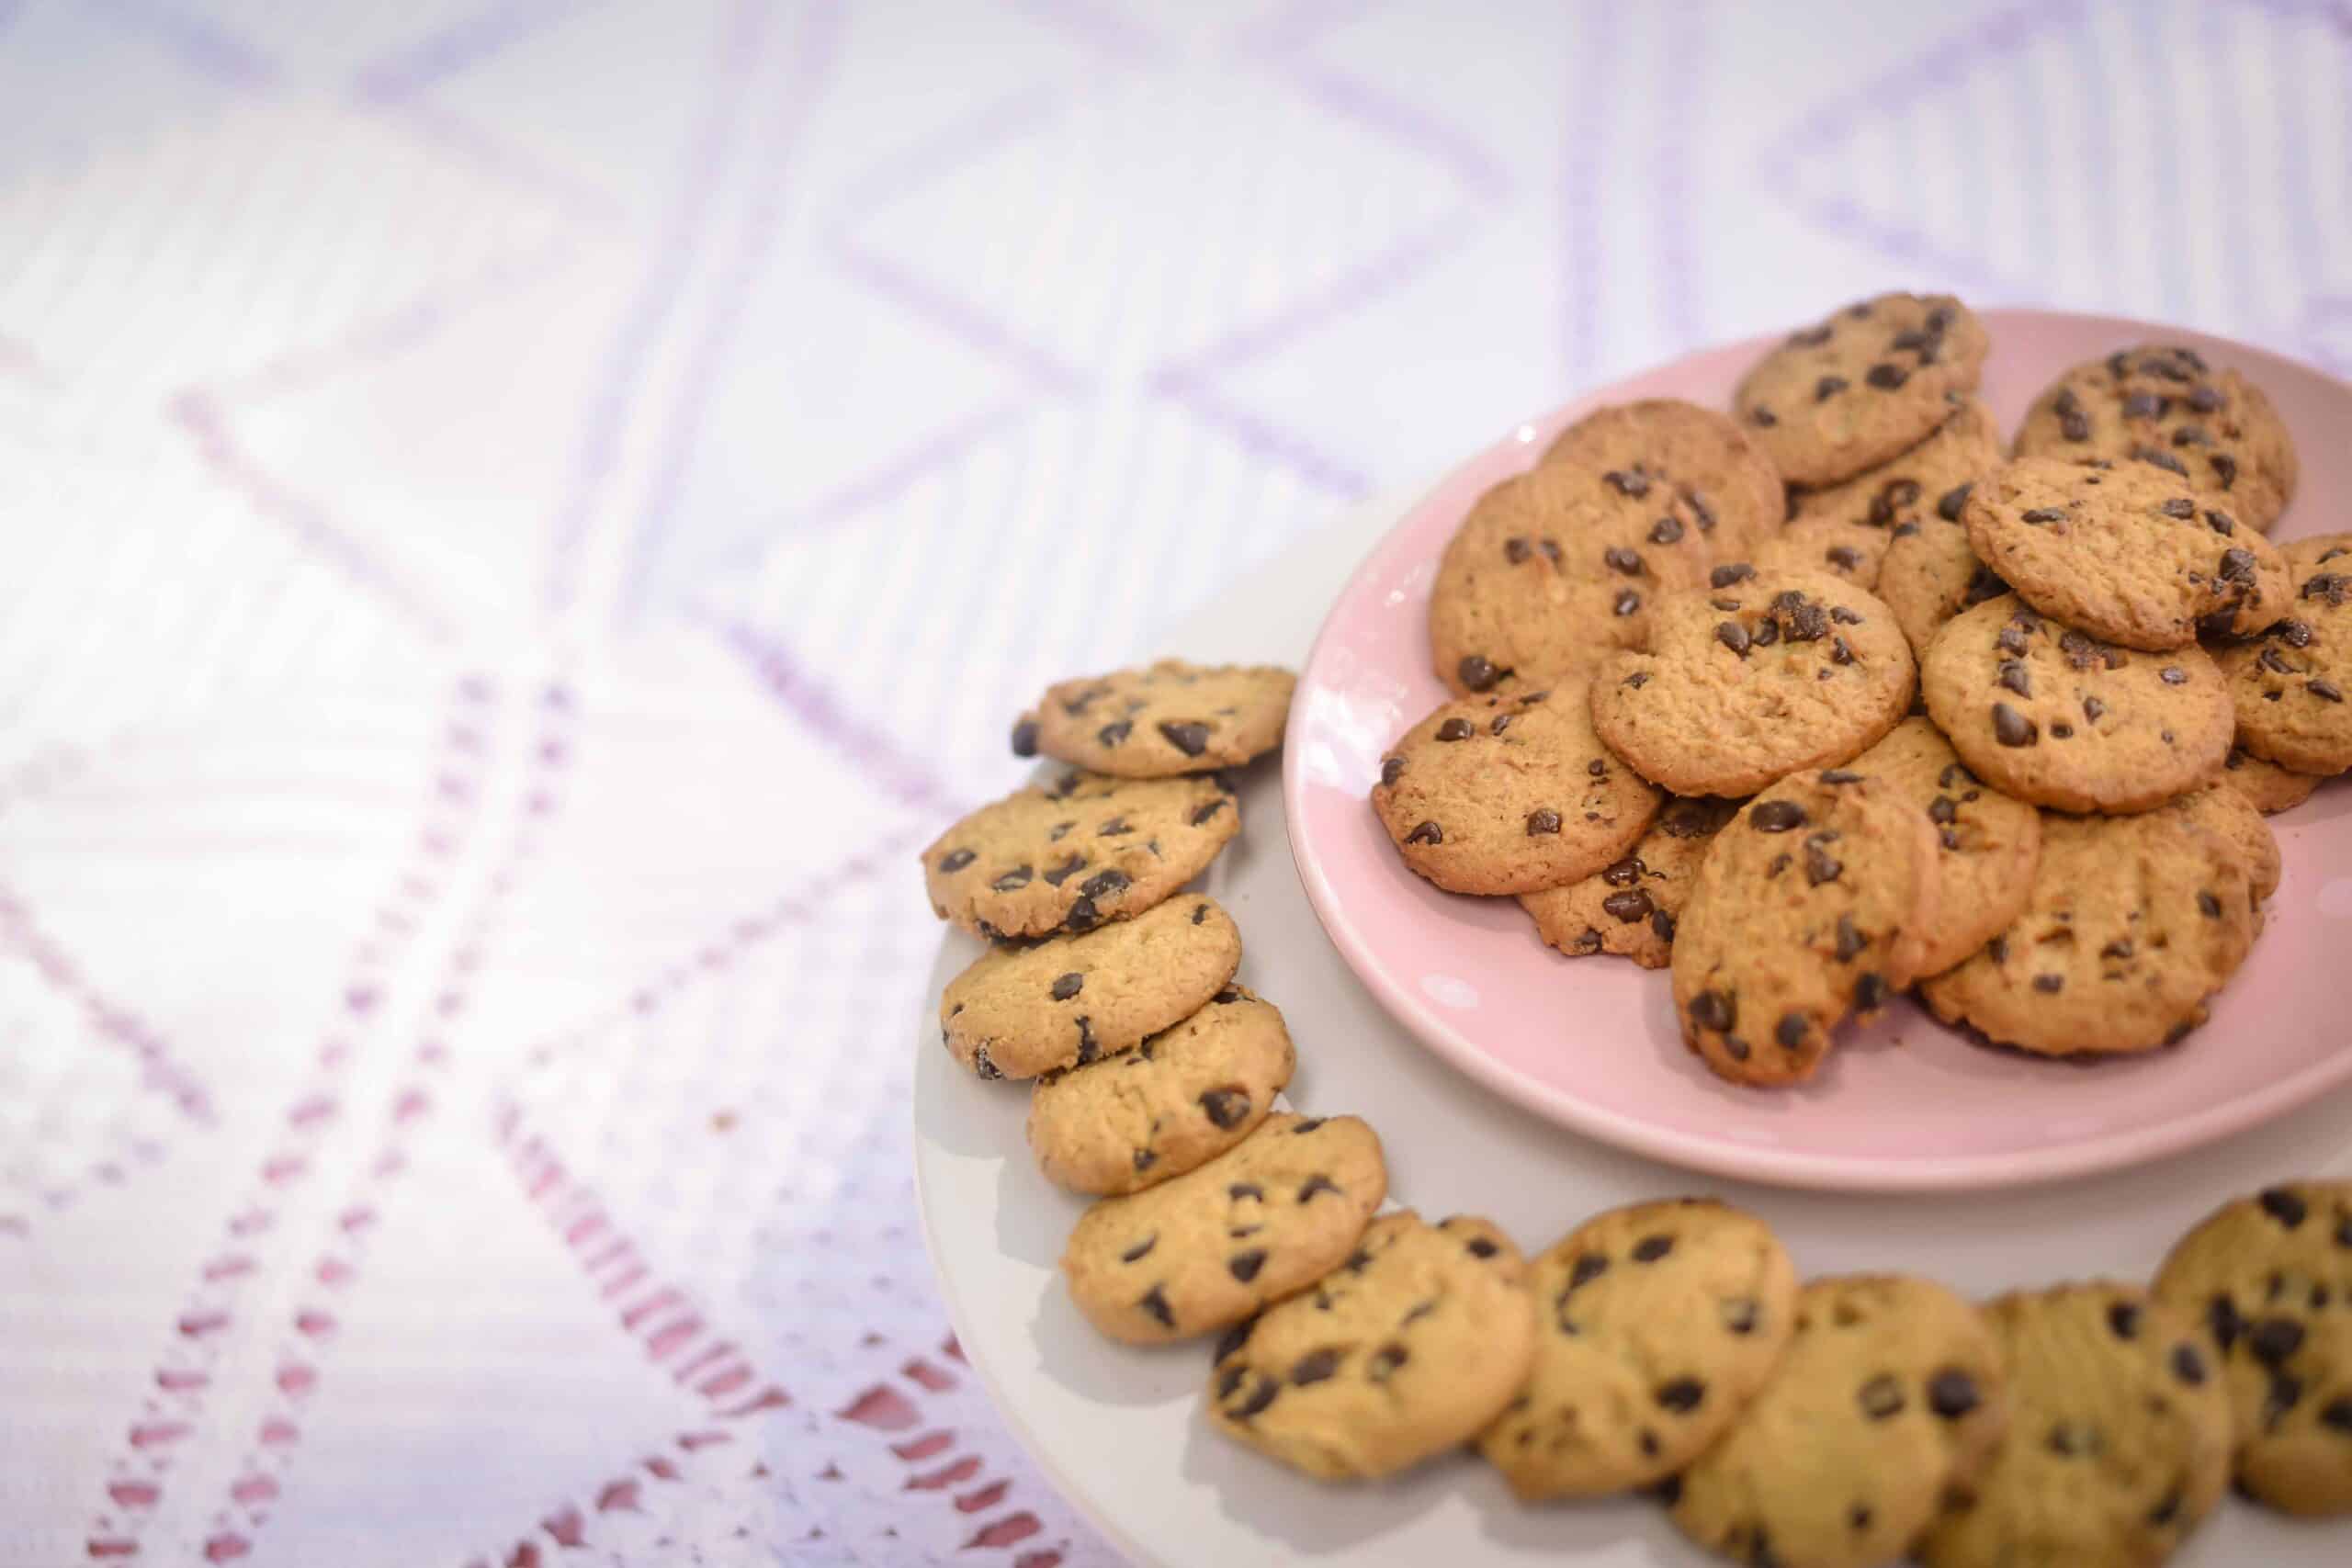 National Chocolate Chip Day!